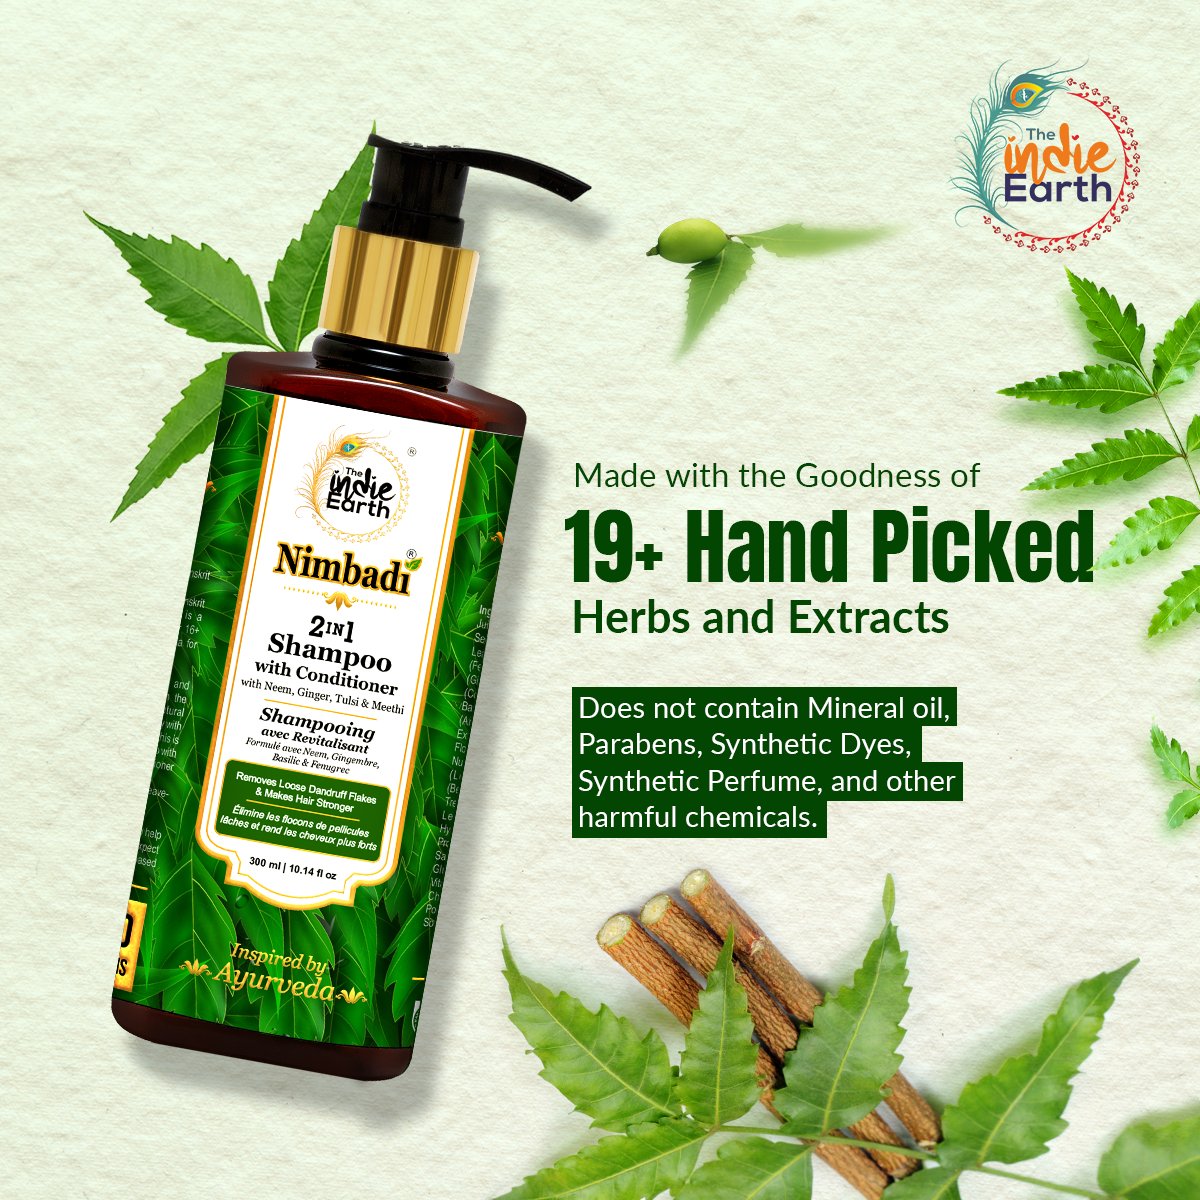 🛒 Buy Now: bit.ly/3JqVEPs 
Nimbadi is a powerful combination of NEEM and other 19+ natural ingredients prescribed in Ayurveda. This hair shampoo has made with the Goodness of 19+ Hand Picked Herbs and Extracts. 
#TheIndieEarth #nimbadi #ingredients #neem #neemshampoo